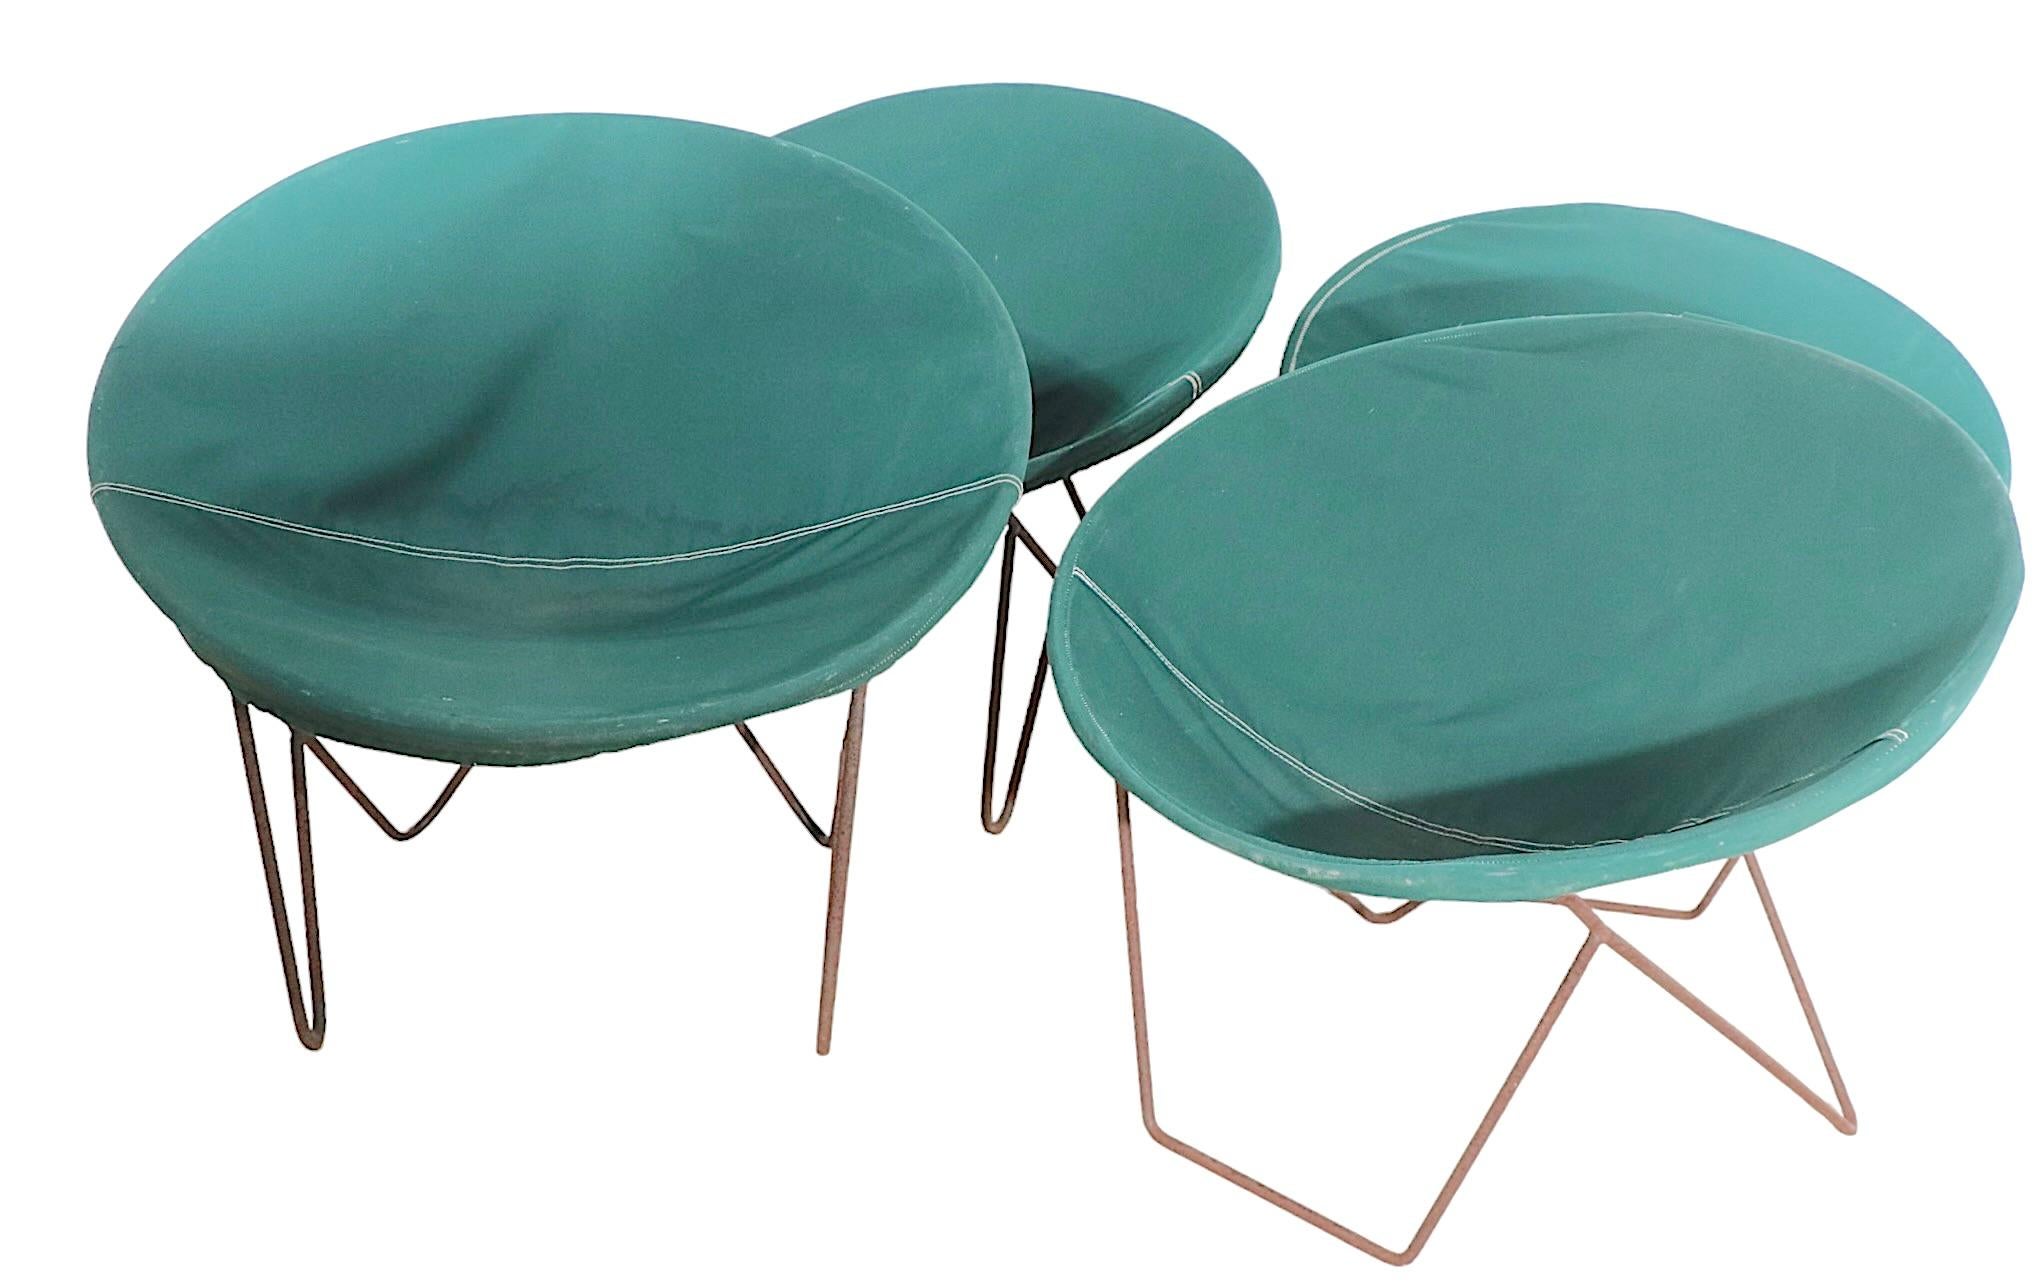 American Mid Century Wrought Iron and Canvass Hoop Chairs 4 Available Att. to Hedstrom For Sale